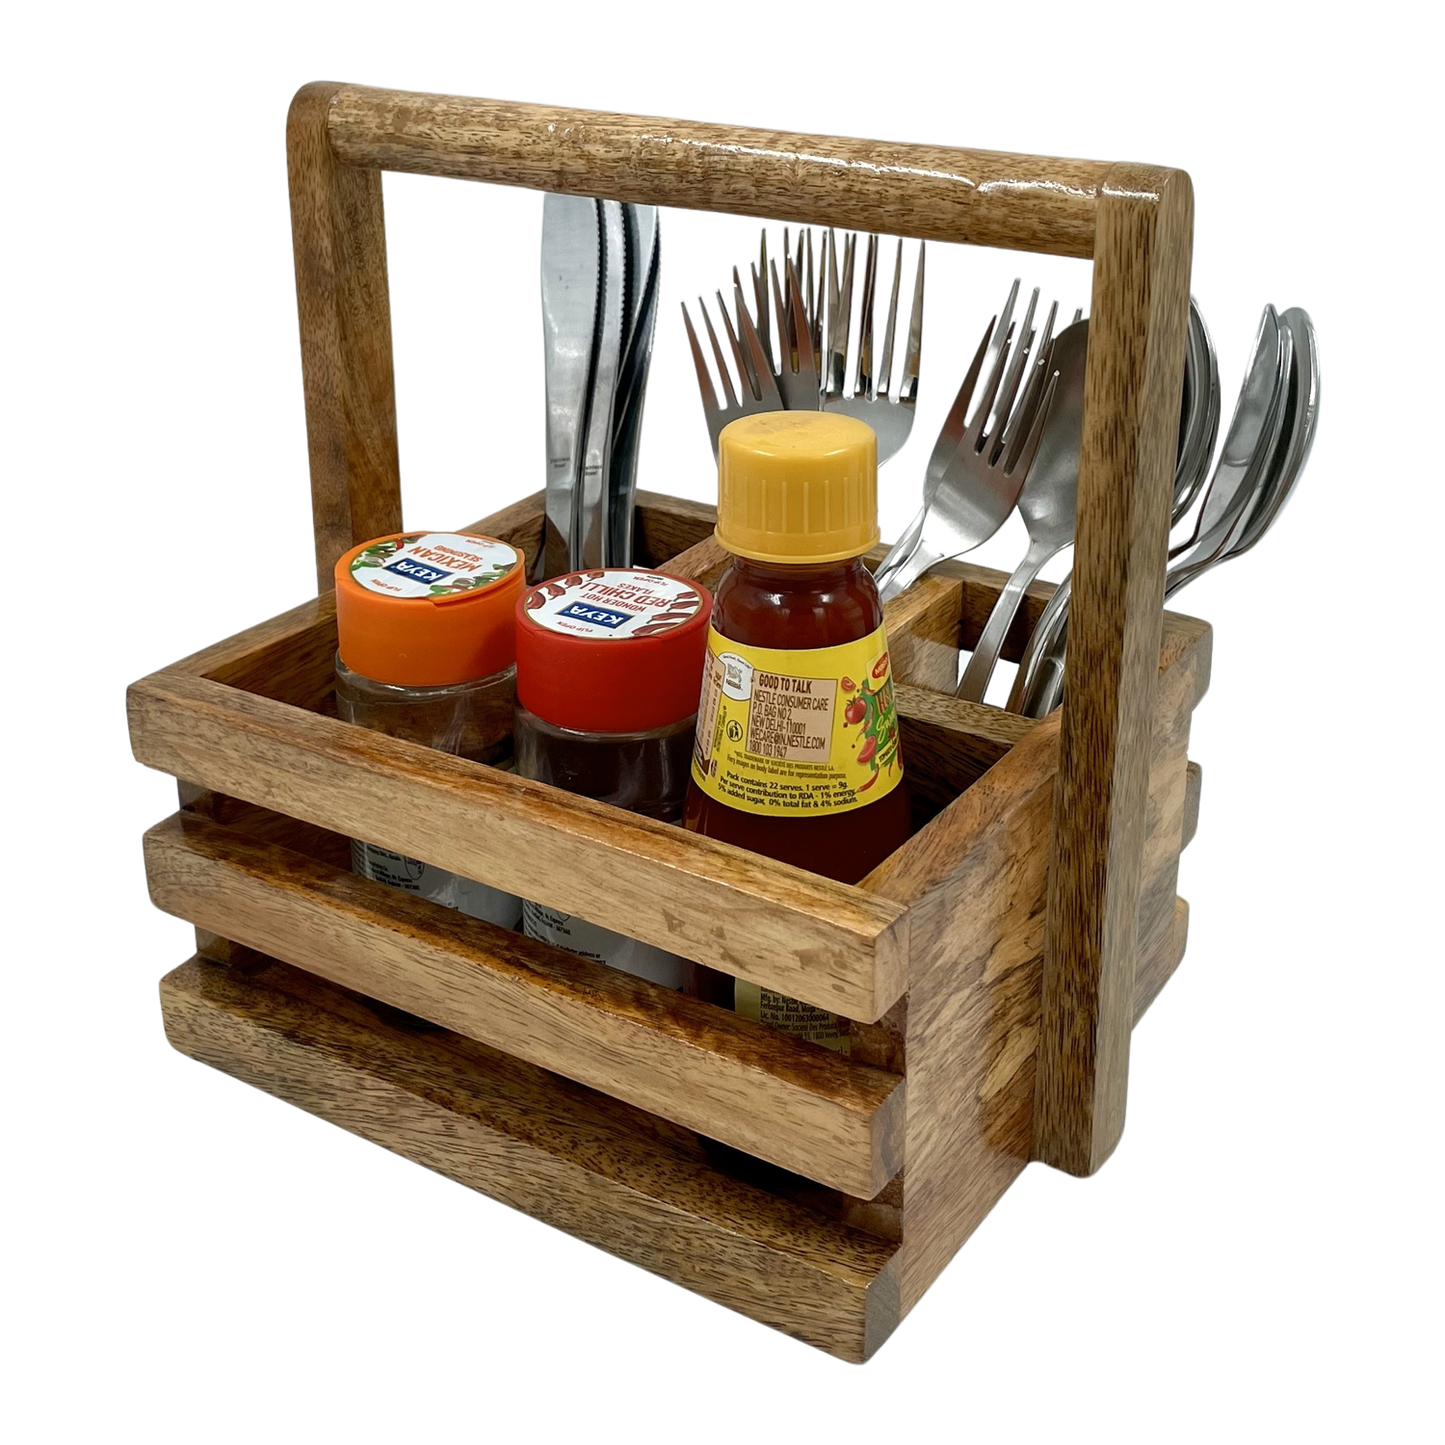 The Weaver's Nest Wooden Table Utility Cutlery Holder/Caddy with Handle for Spoons, Forks, Knives Organiser for Dining Table, Kitchen and Restaurants